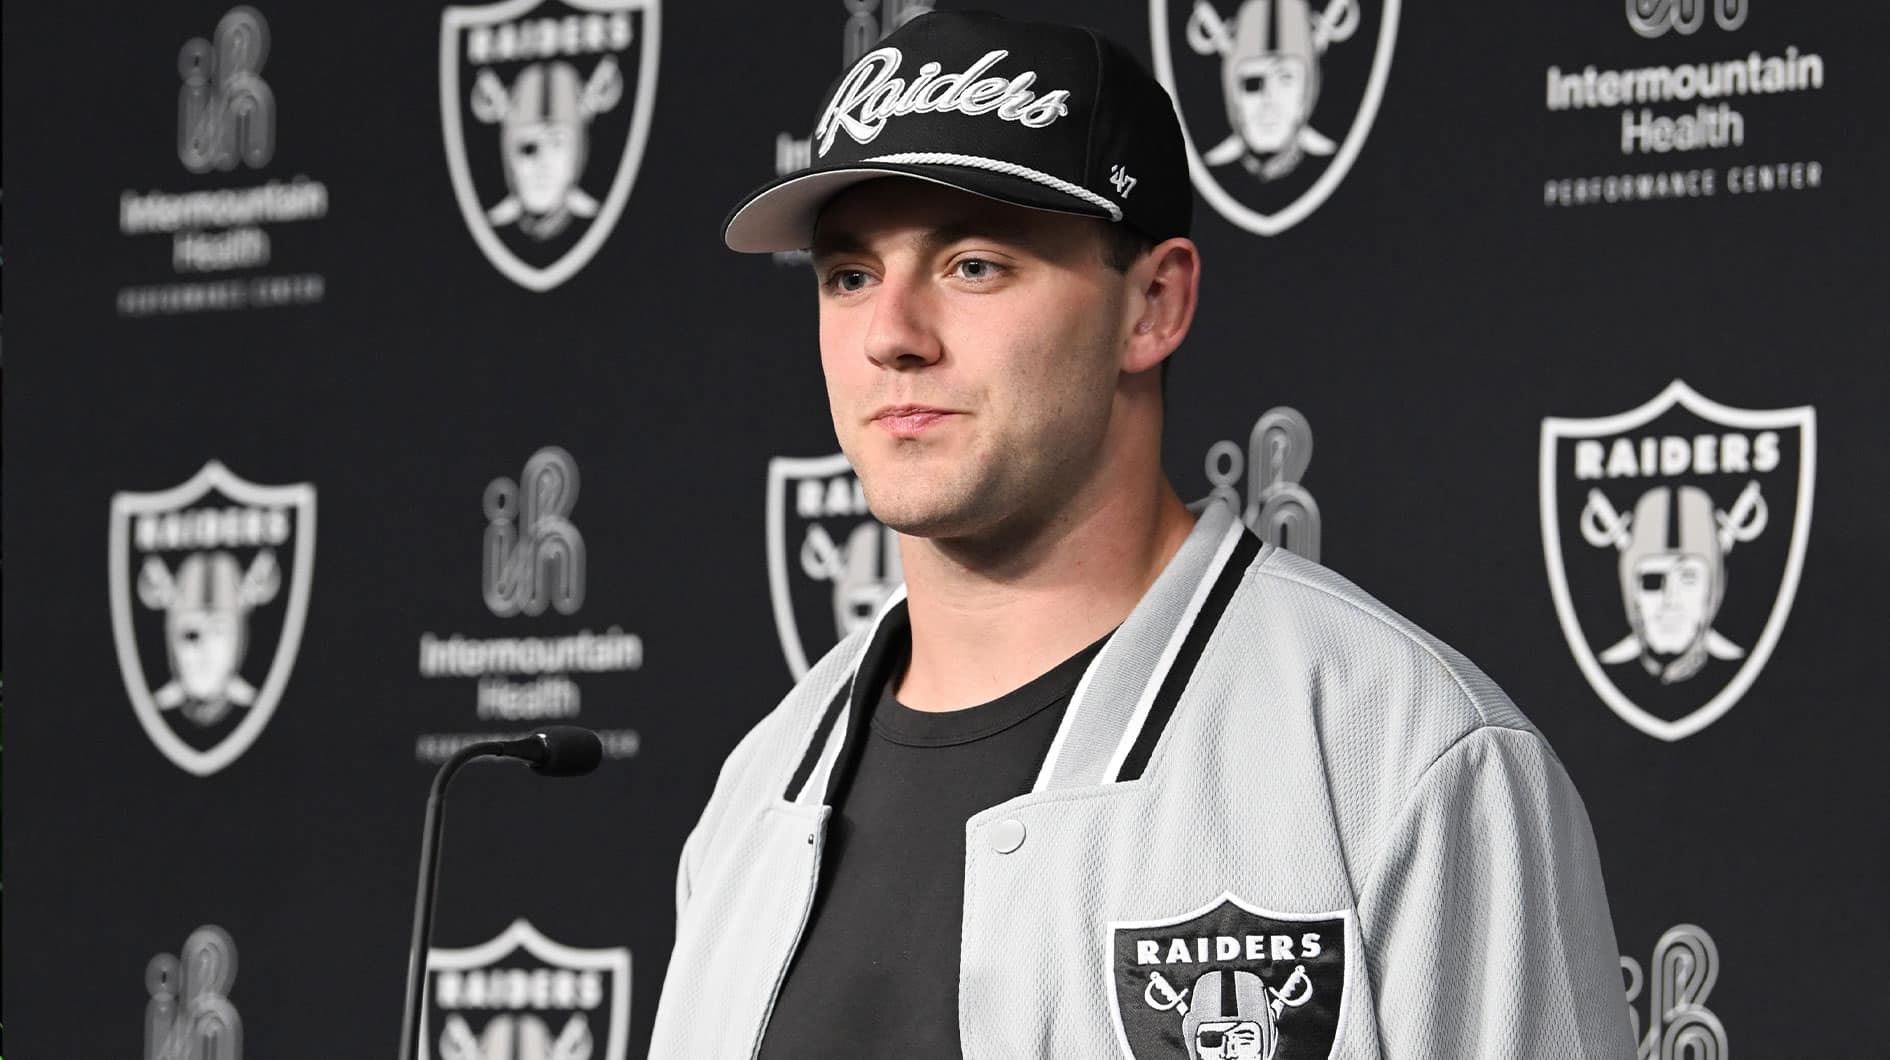 Las Vegas Raiders tight end Brock Bowers speaks to the media at Intermountain Health Performance Center in Henderson, NV.